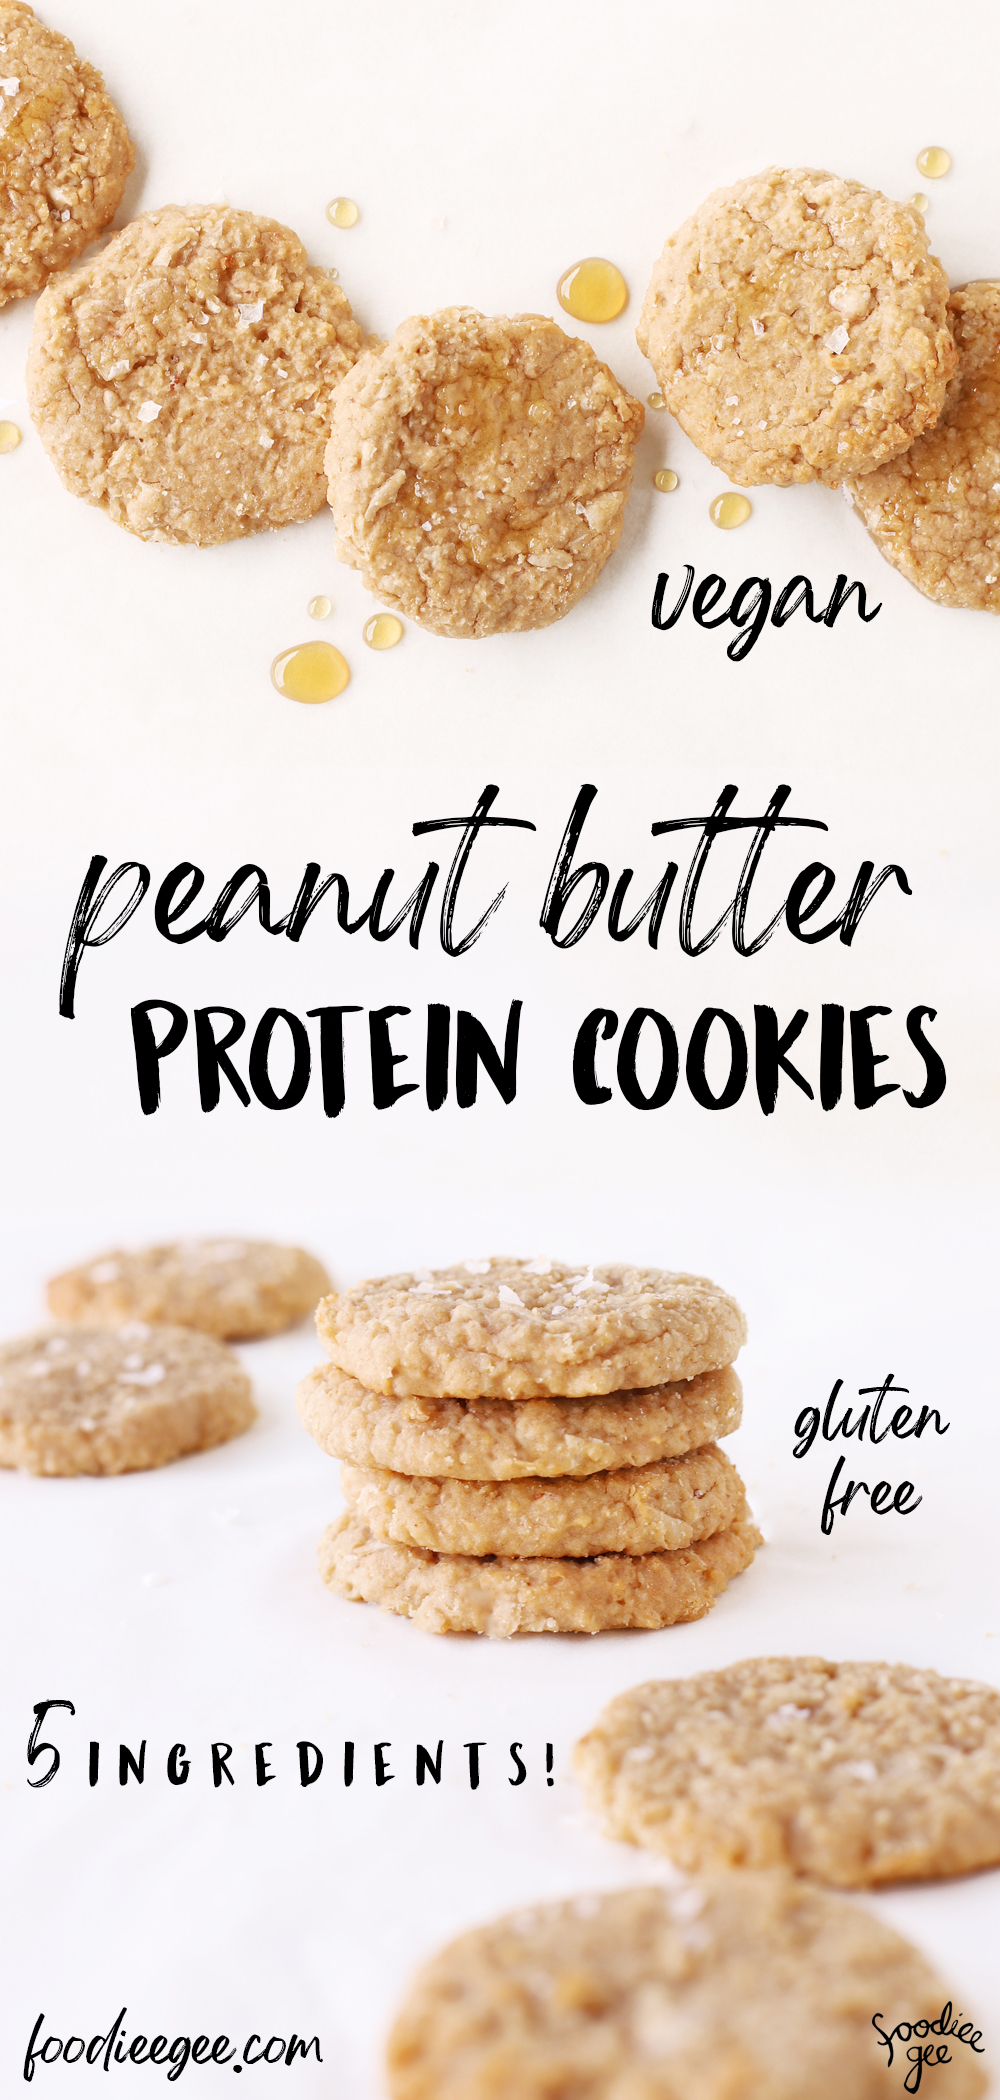 Easy protein vegan peanut butter cookies made with simple healthy plantbased pantry ingredients. Quick and simple refined sugar free, gluten free, oil free, flourless baking recipes.